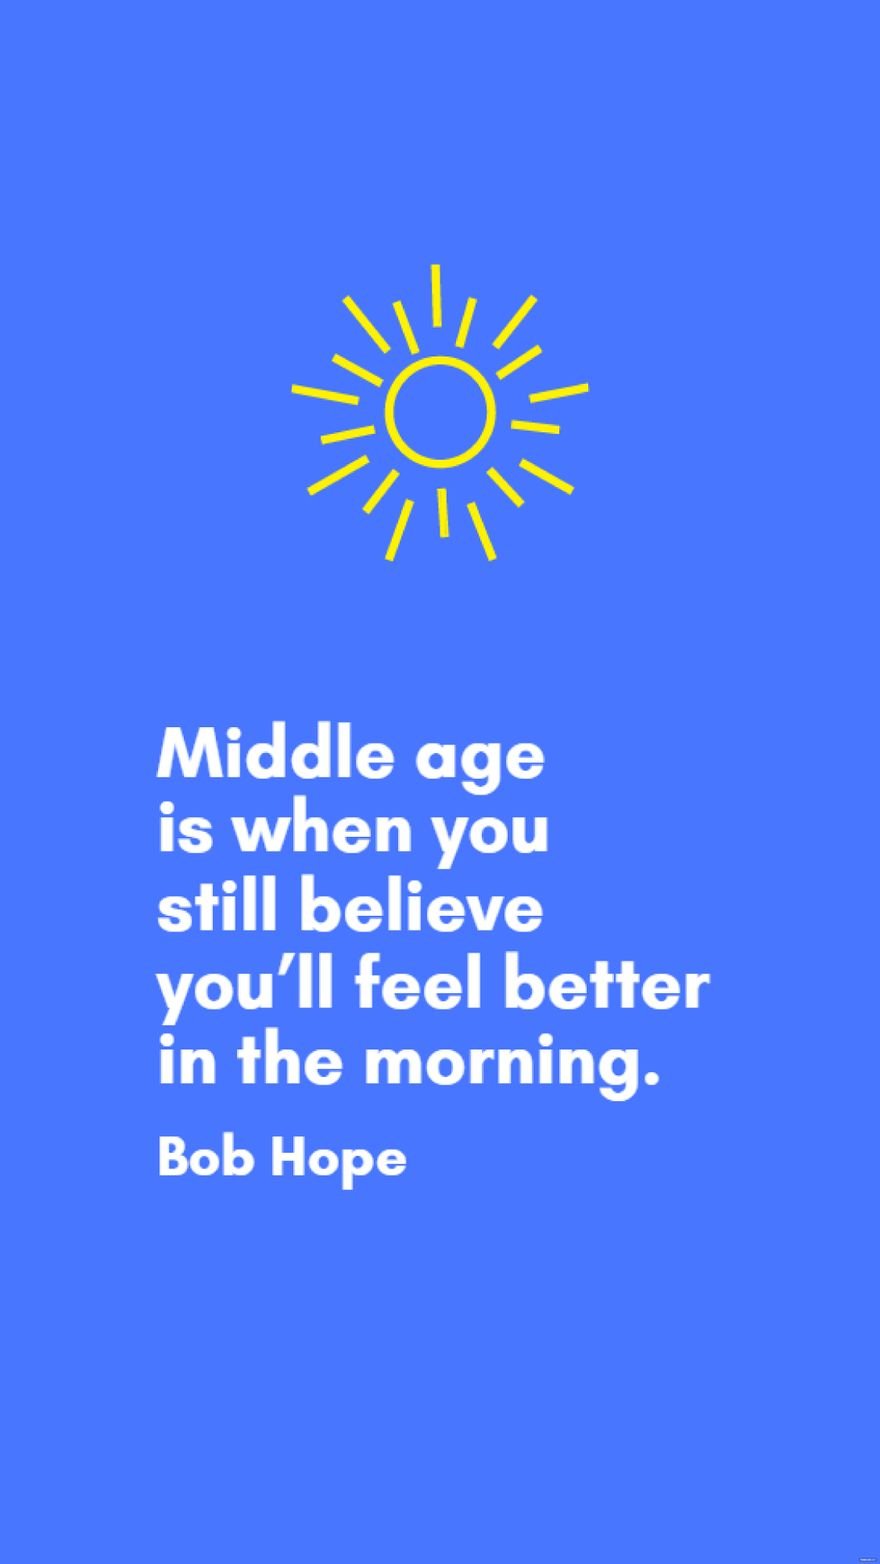 Free Bob Hope - Middle age is when you still believe you’ll feel better in the morning. in JPG